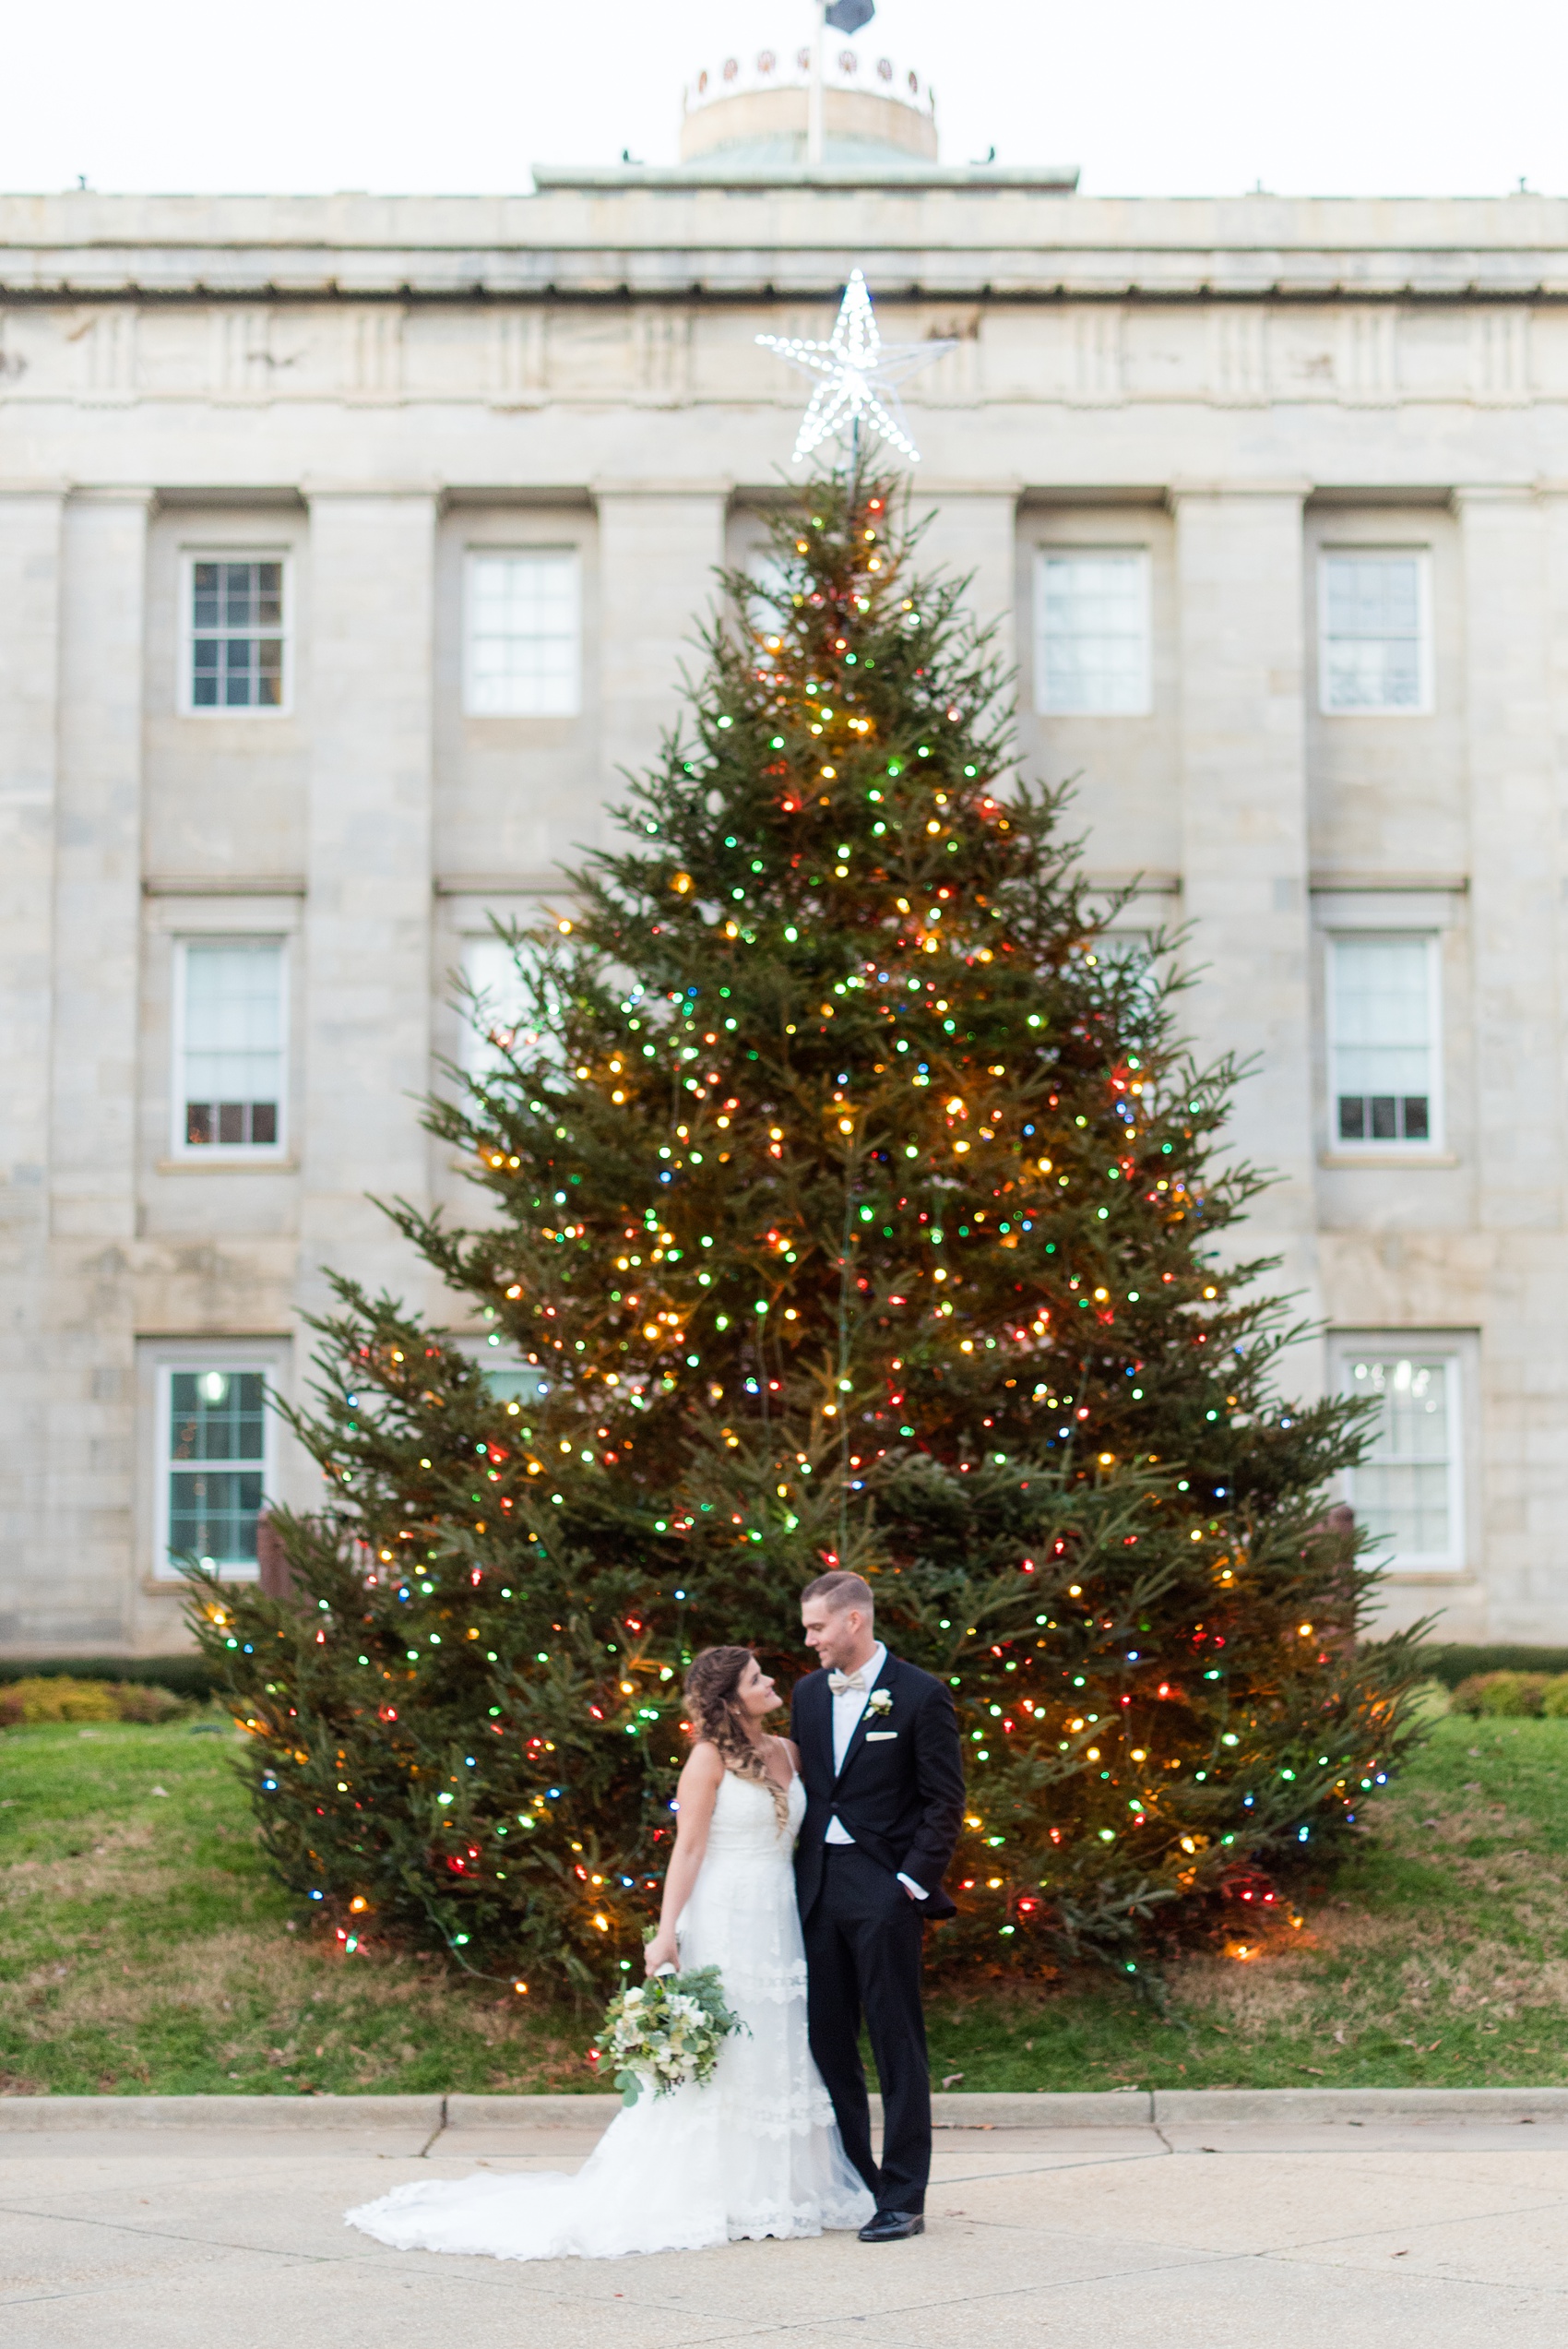 Downtown Raleigh wedding photographer Mikkel Paige Photography captures a December wedding, with evergreen and Christmas touches during the holidays. The reception was held at The Stockroom at 230 and getting ready at The Glass Box. #mikkelpaige #downtownraleighwedding #raleighweddingphotos #raleighweddingphotographer